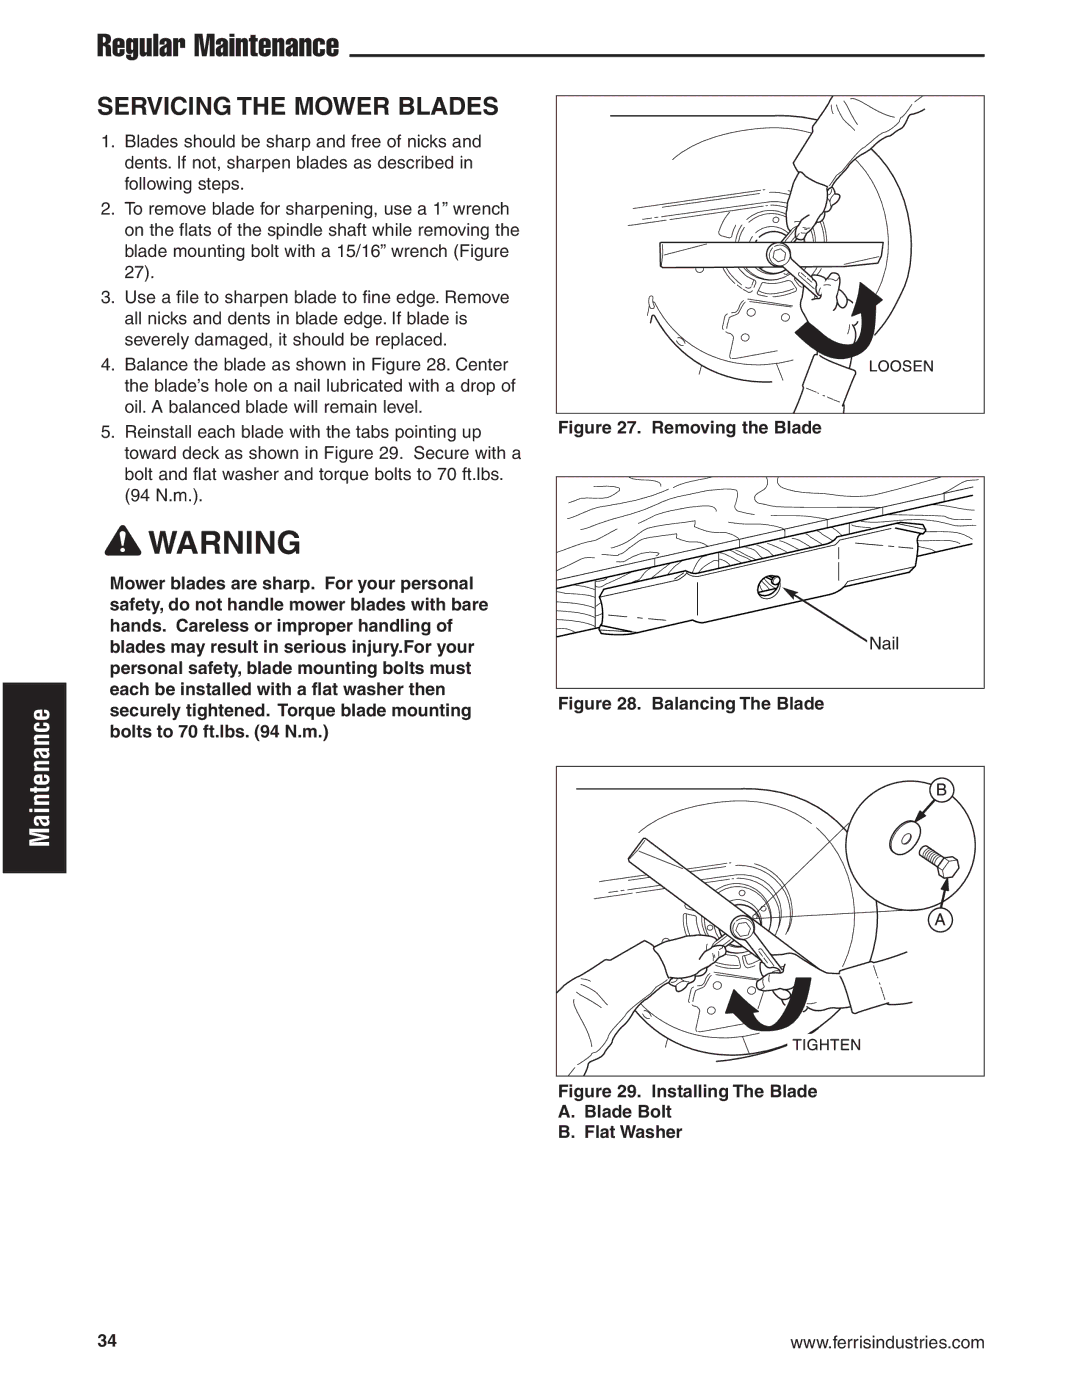 Briggs & Stratton 5900619 manual Servicing the Mower Blades, Removing the Blade 